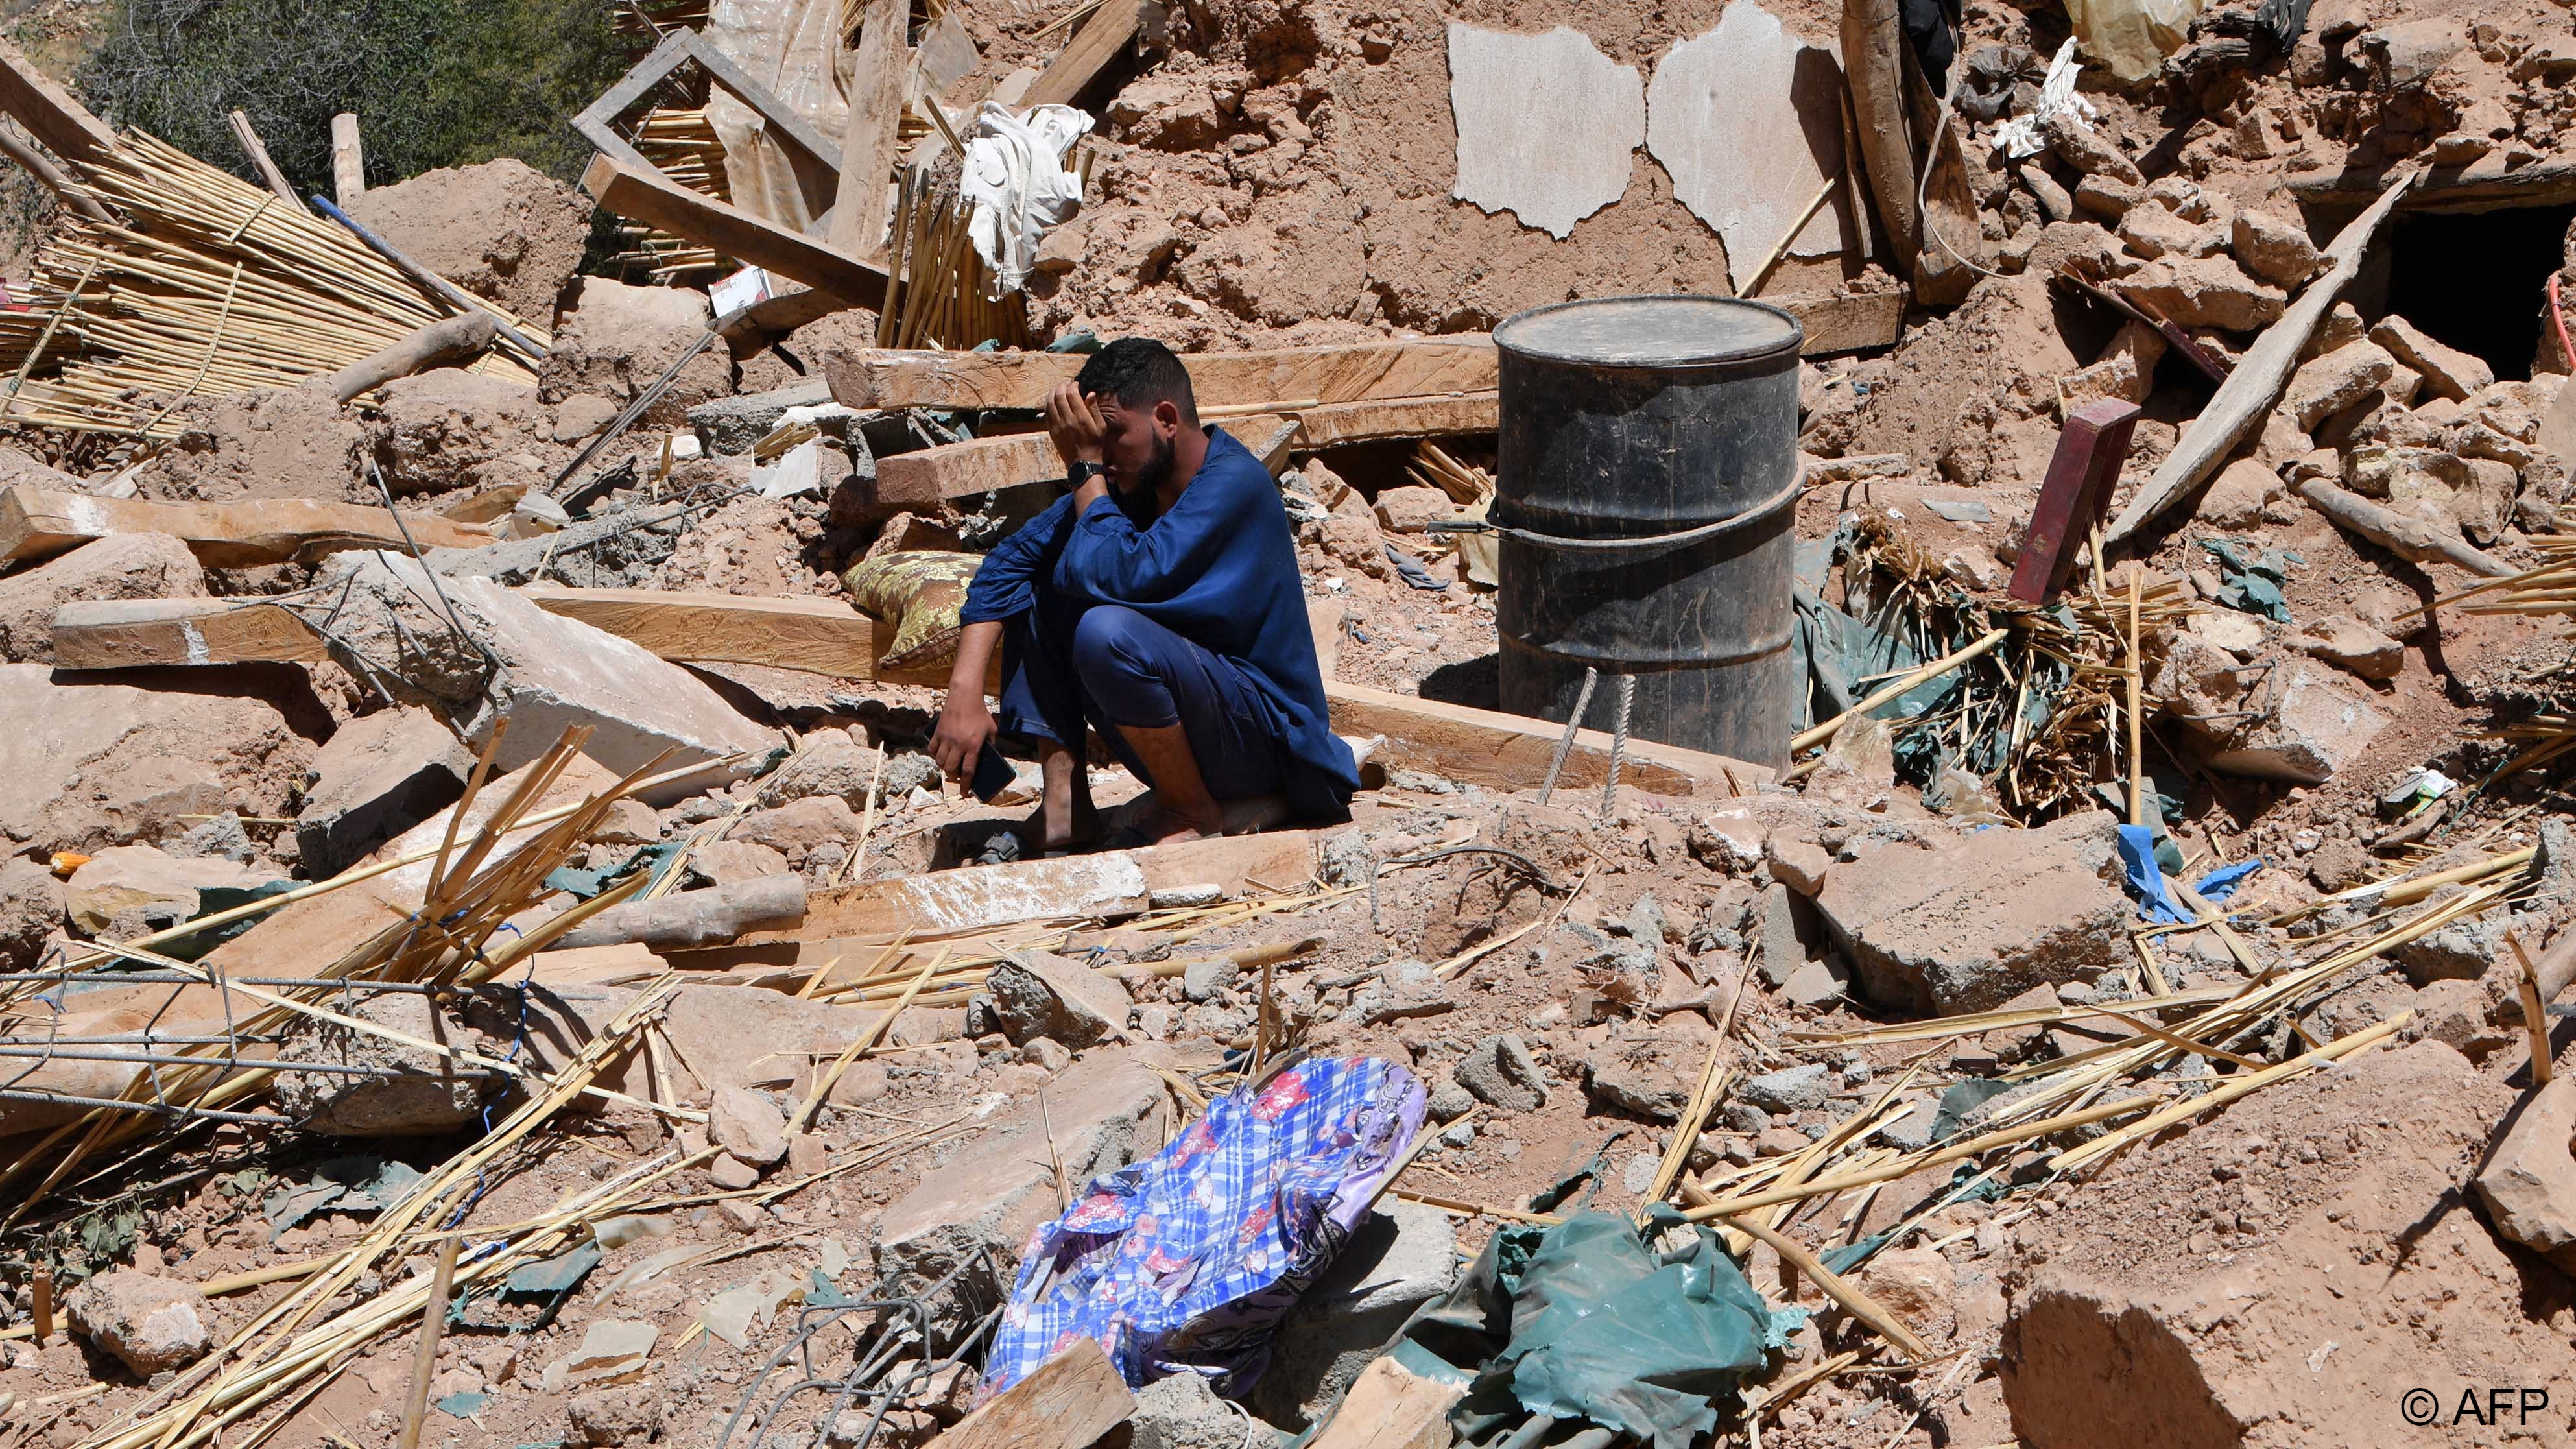 The village of Tikht near the epicentre of Morocco's massive earthquake was effectively destroyed (image: Fethi Belaid/AFP) 